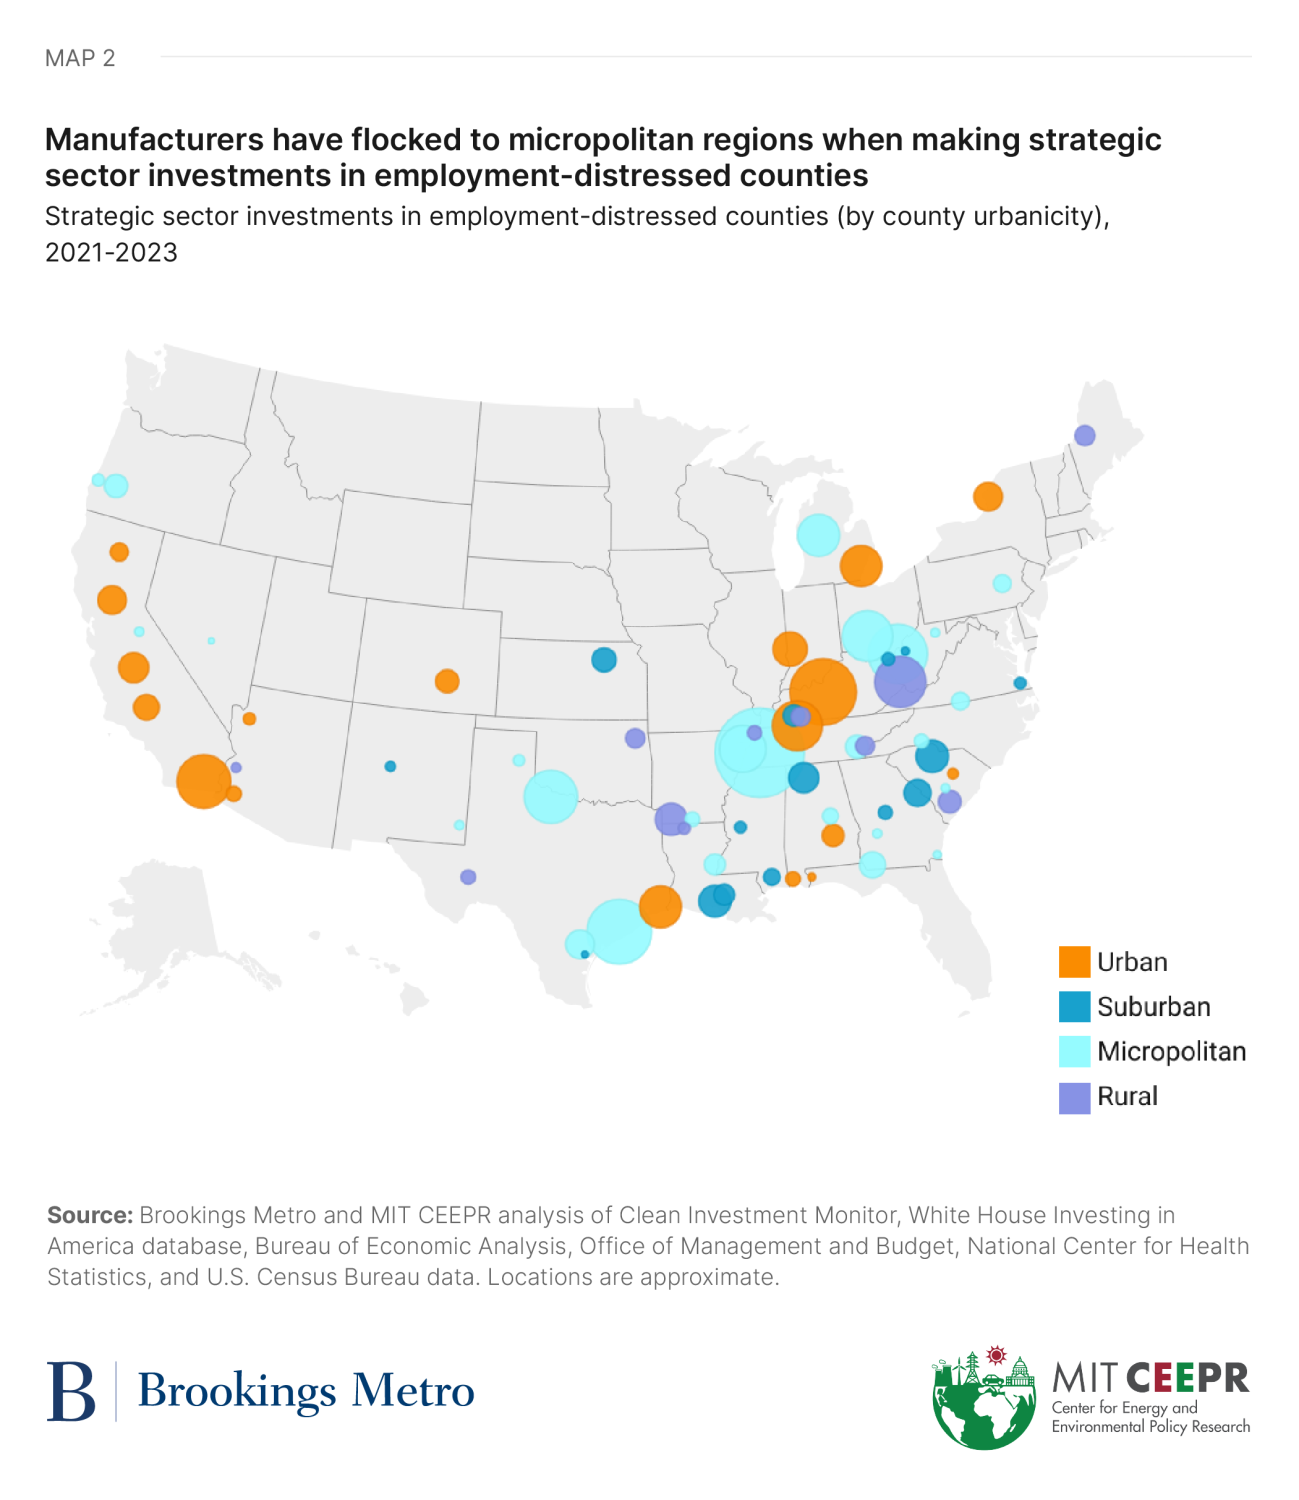 Map 2: Manufacturers have flocked to micropolitan regions when making strategic sector investments in employment-distressed counties